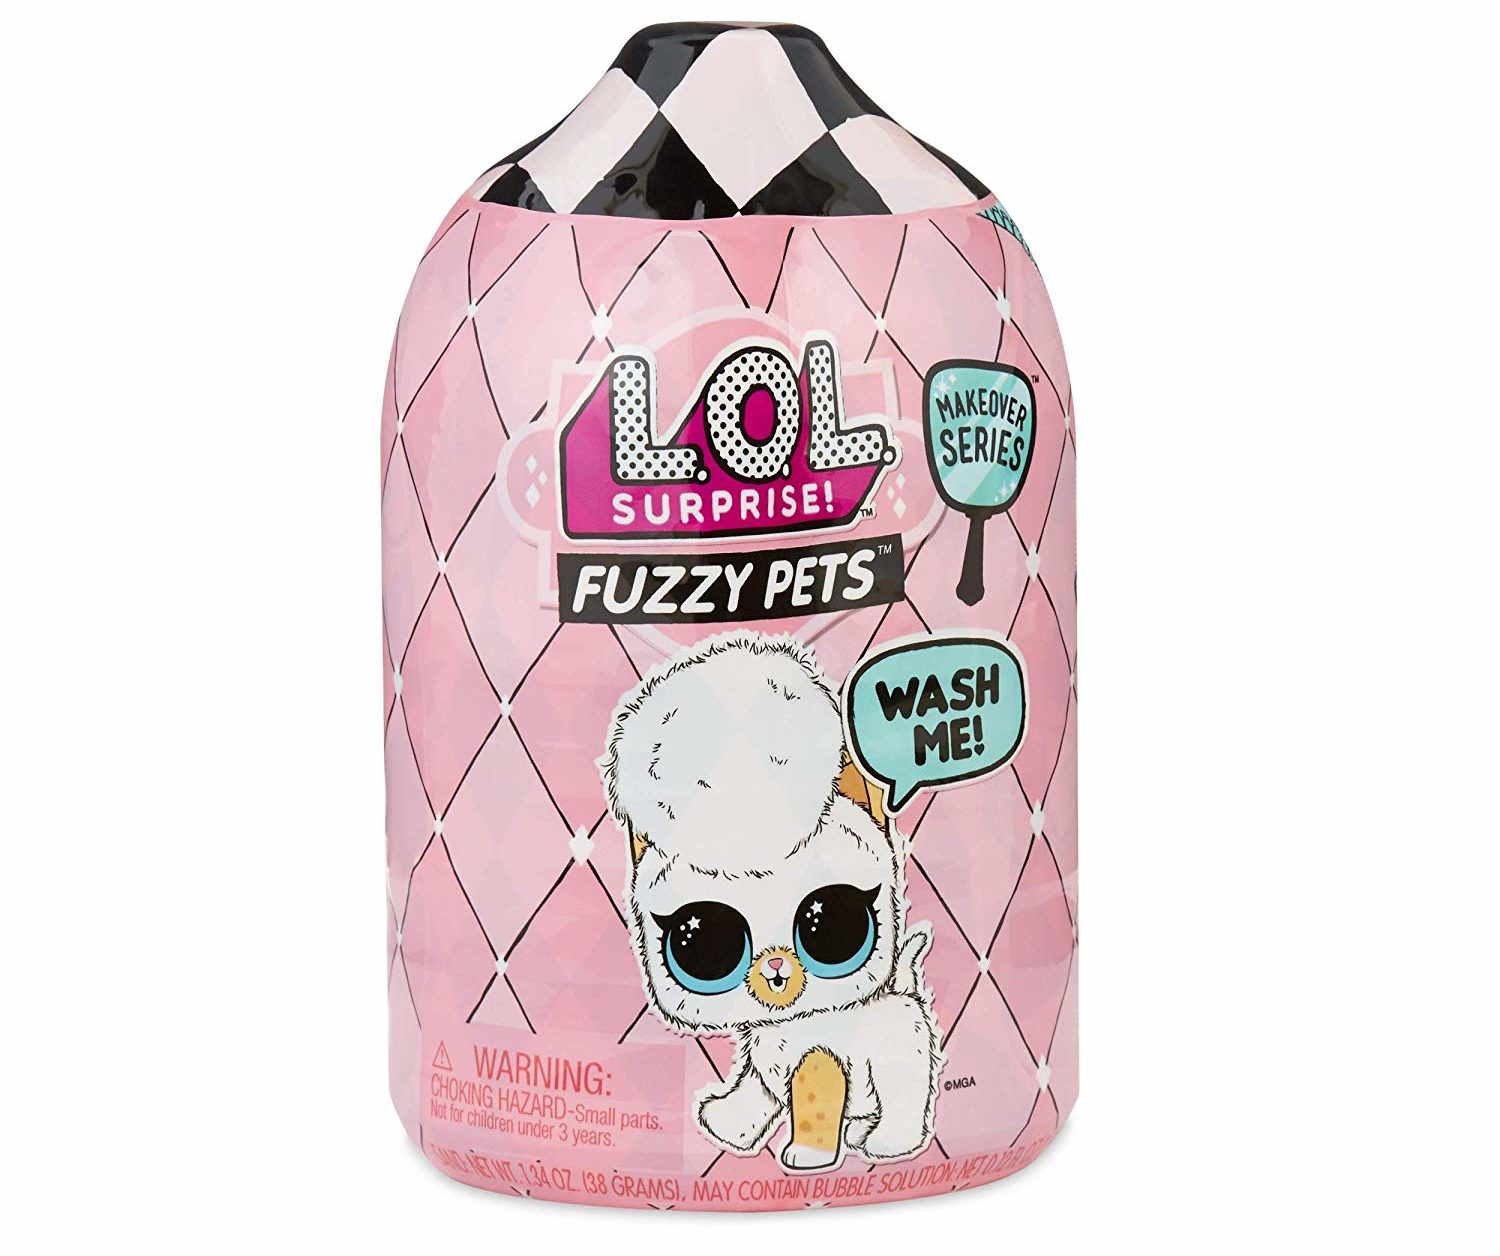 Where to Buy LOL Fuzzy Pets Series 2 2022 - Pre Order, Release Date Wave 2 Amazon